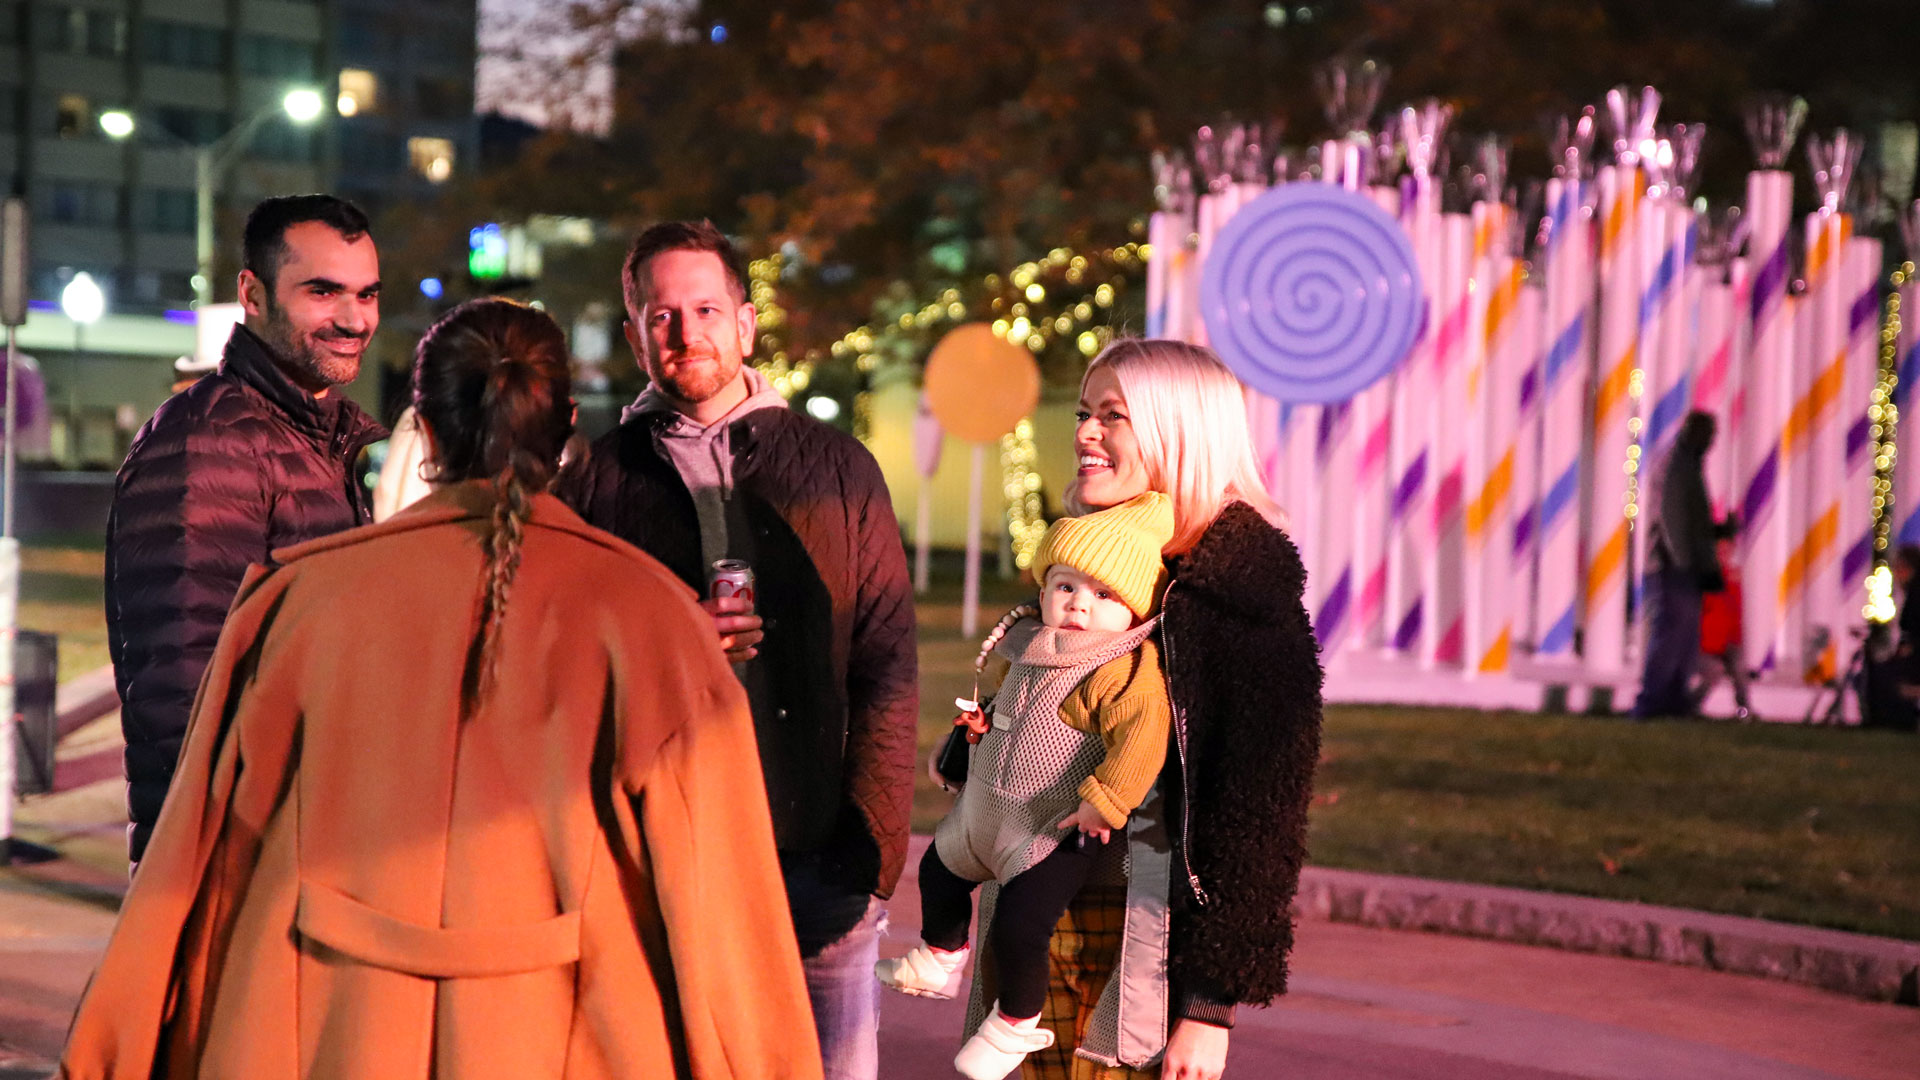 Family conversing in front of installation at Candy Lane